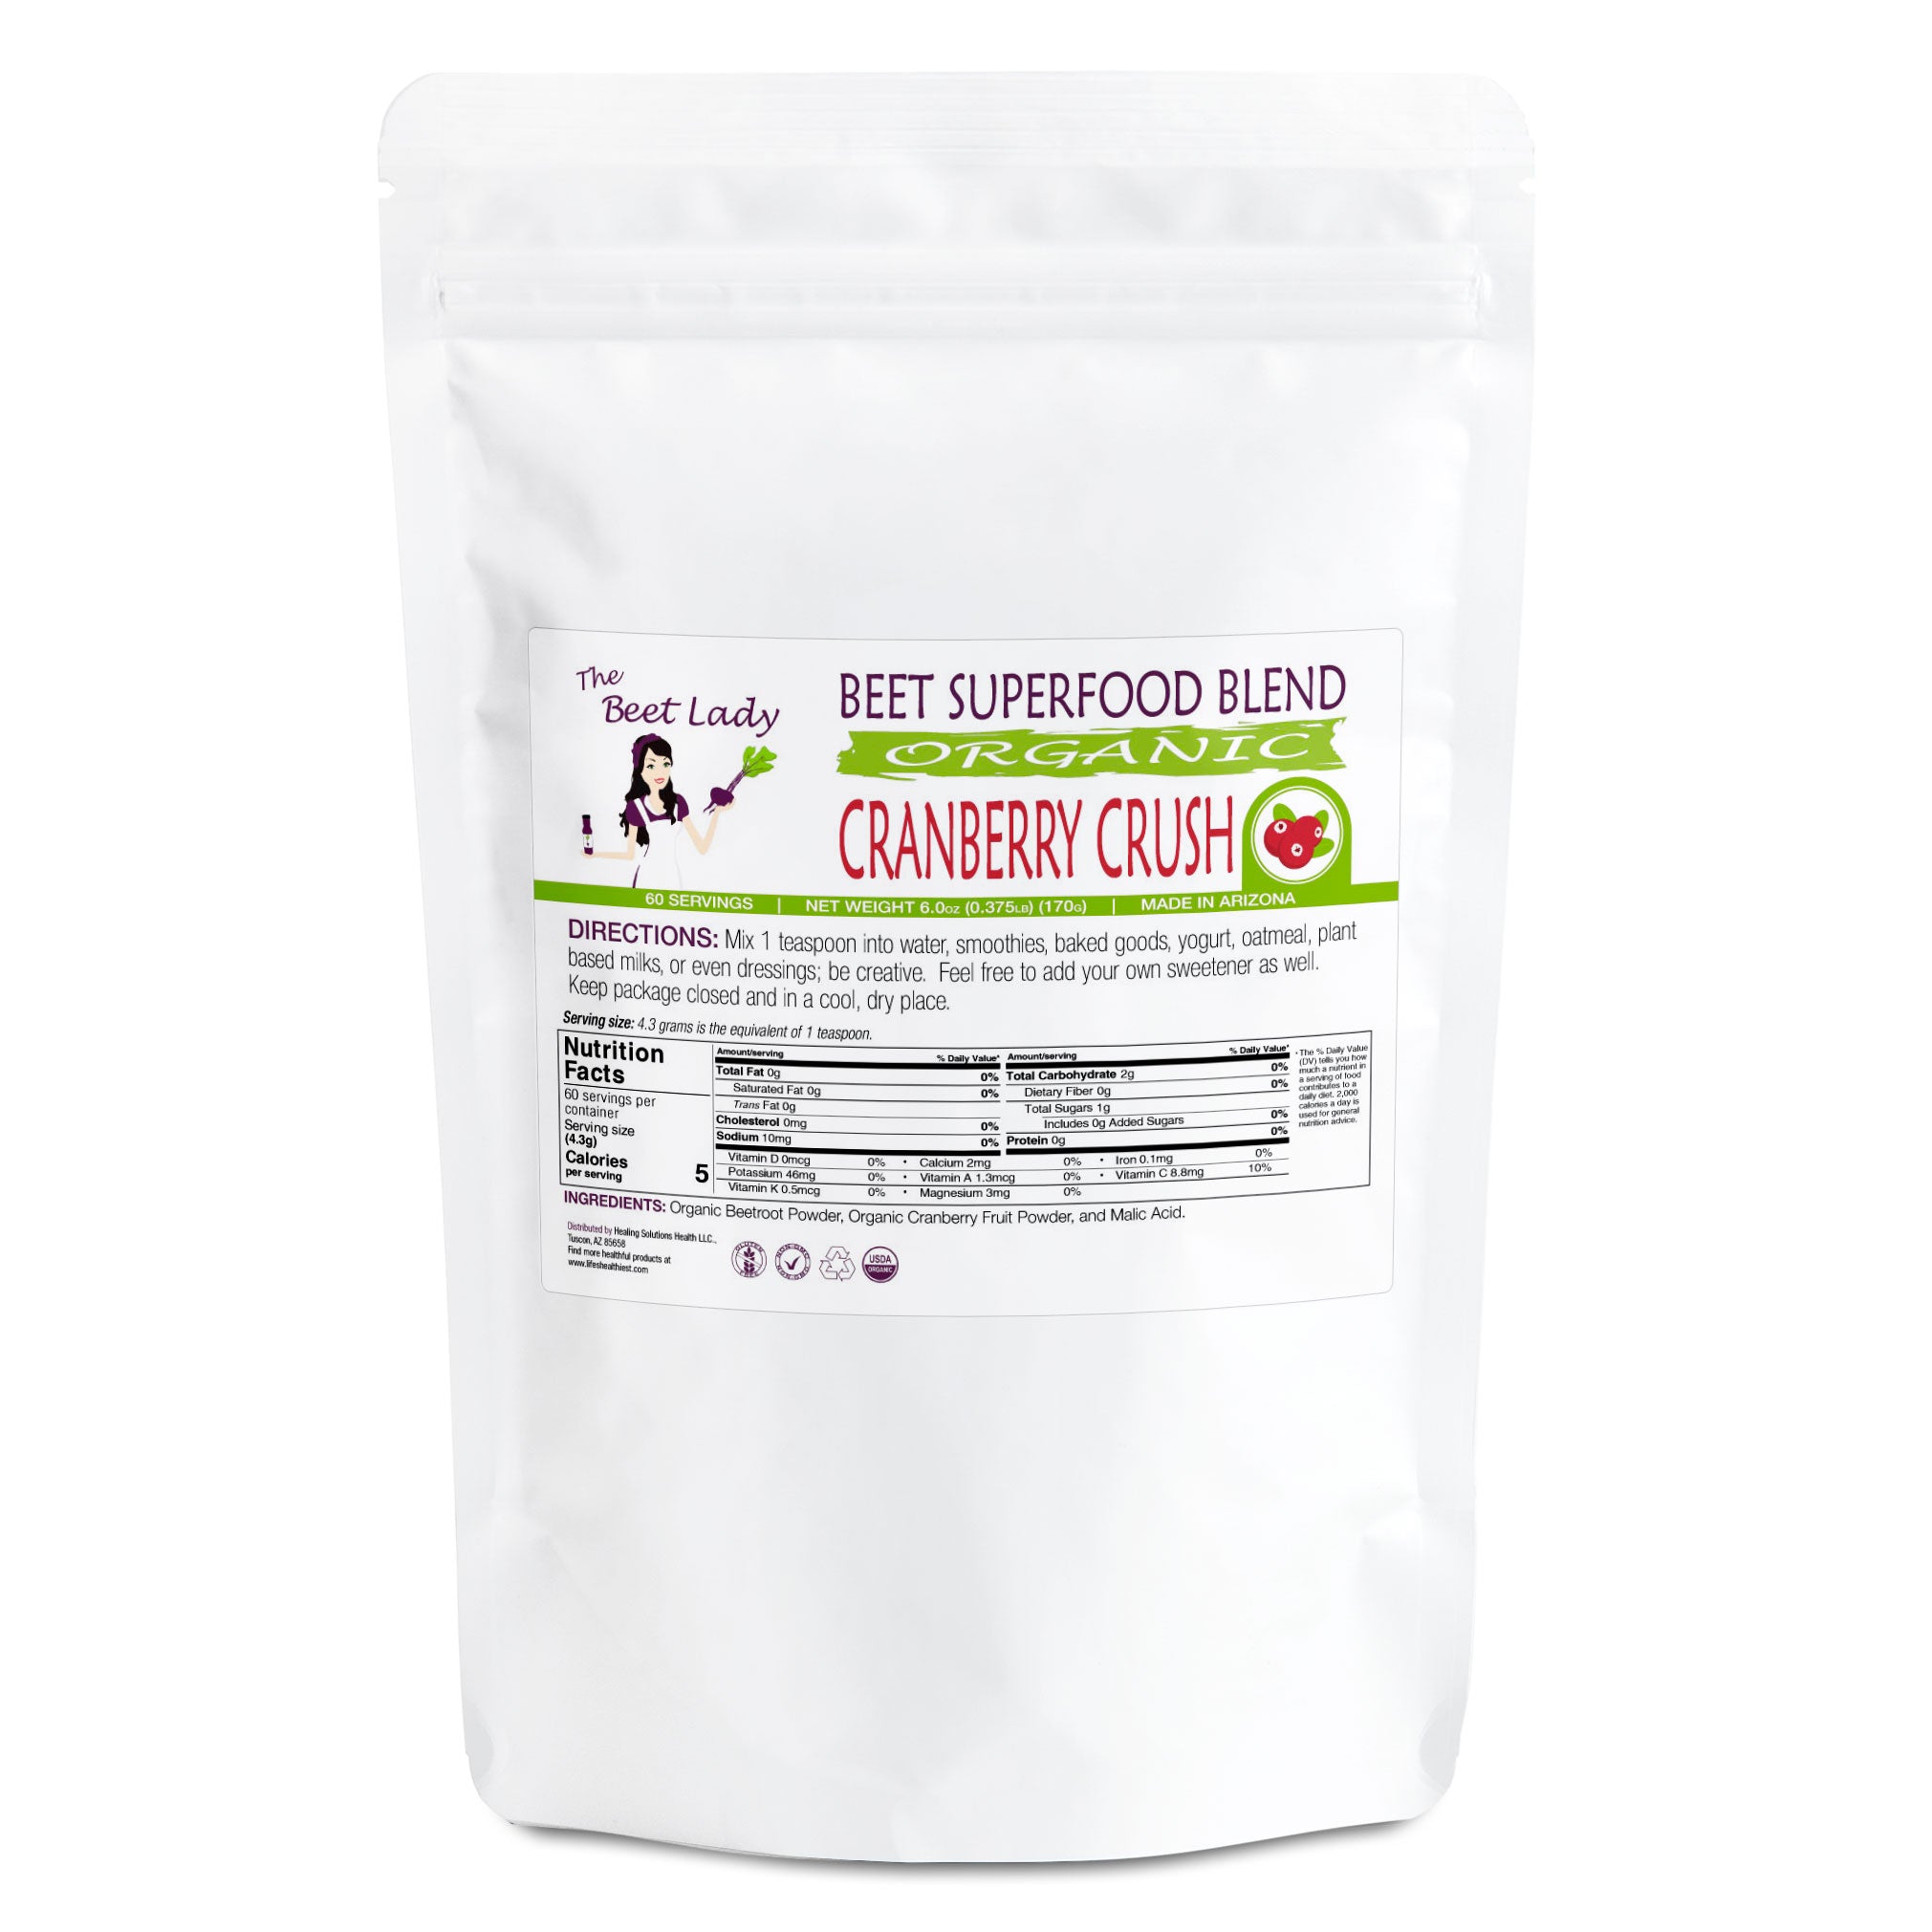 The Beet Lady CRANBERRY CRUSH Beet Food Nutritional Therapy Powder for Thyroid and UTI's 6 oz